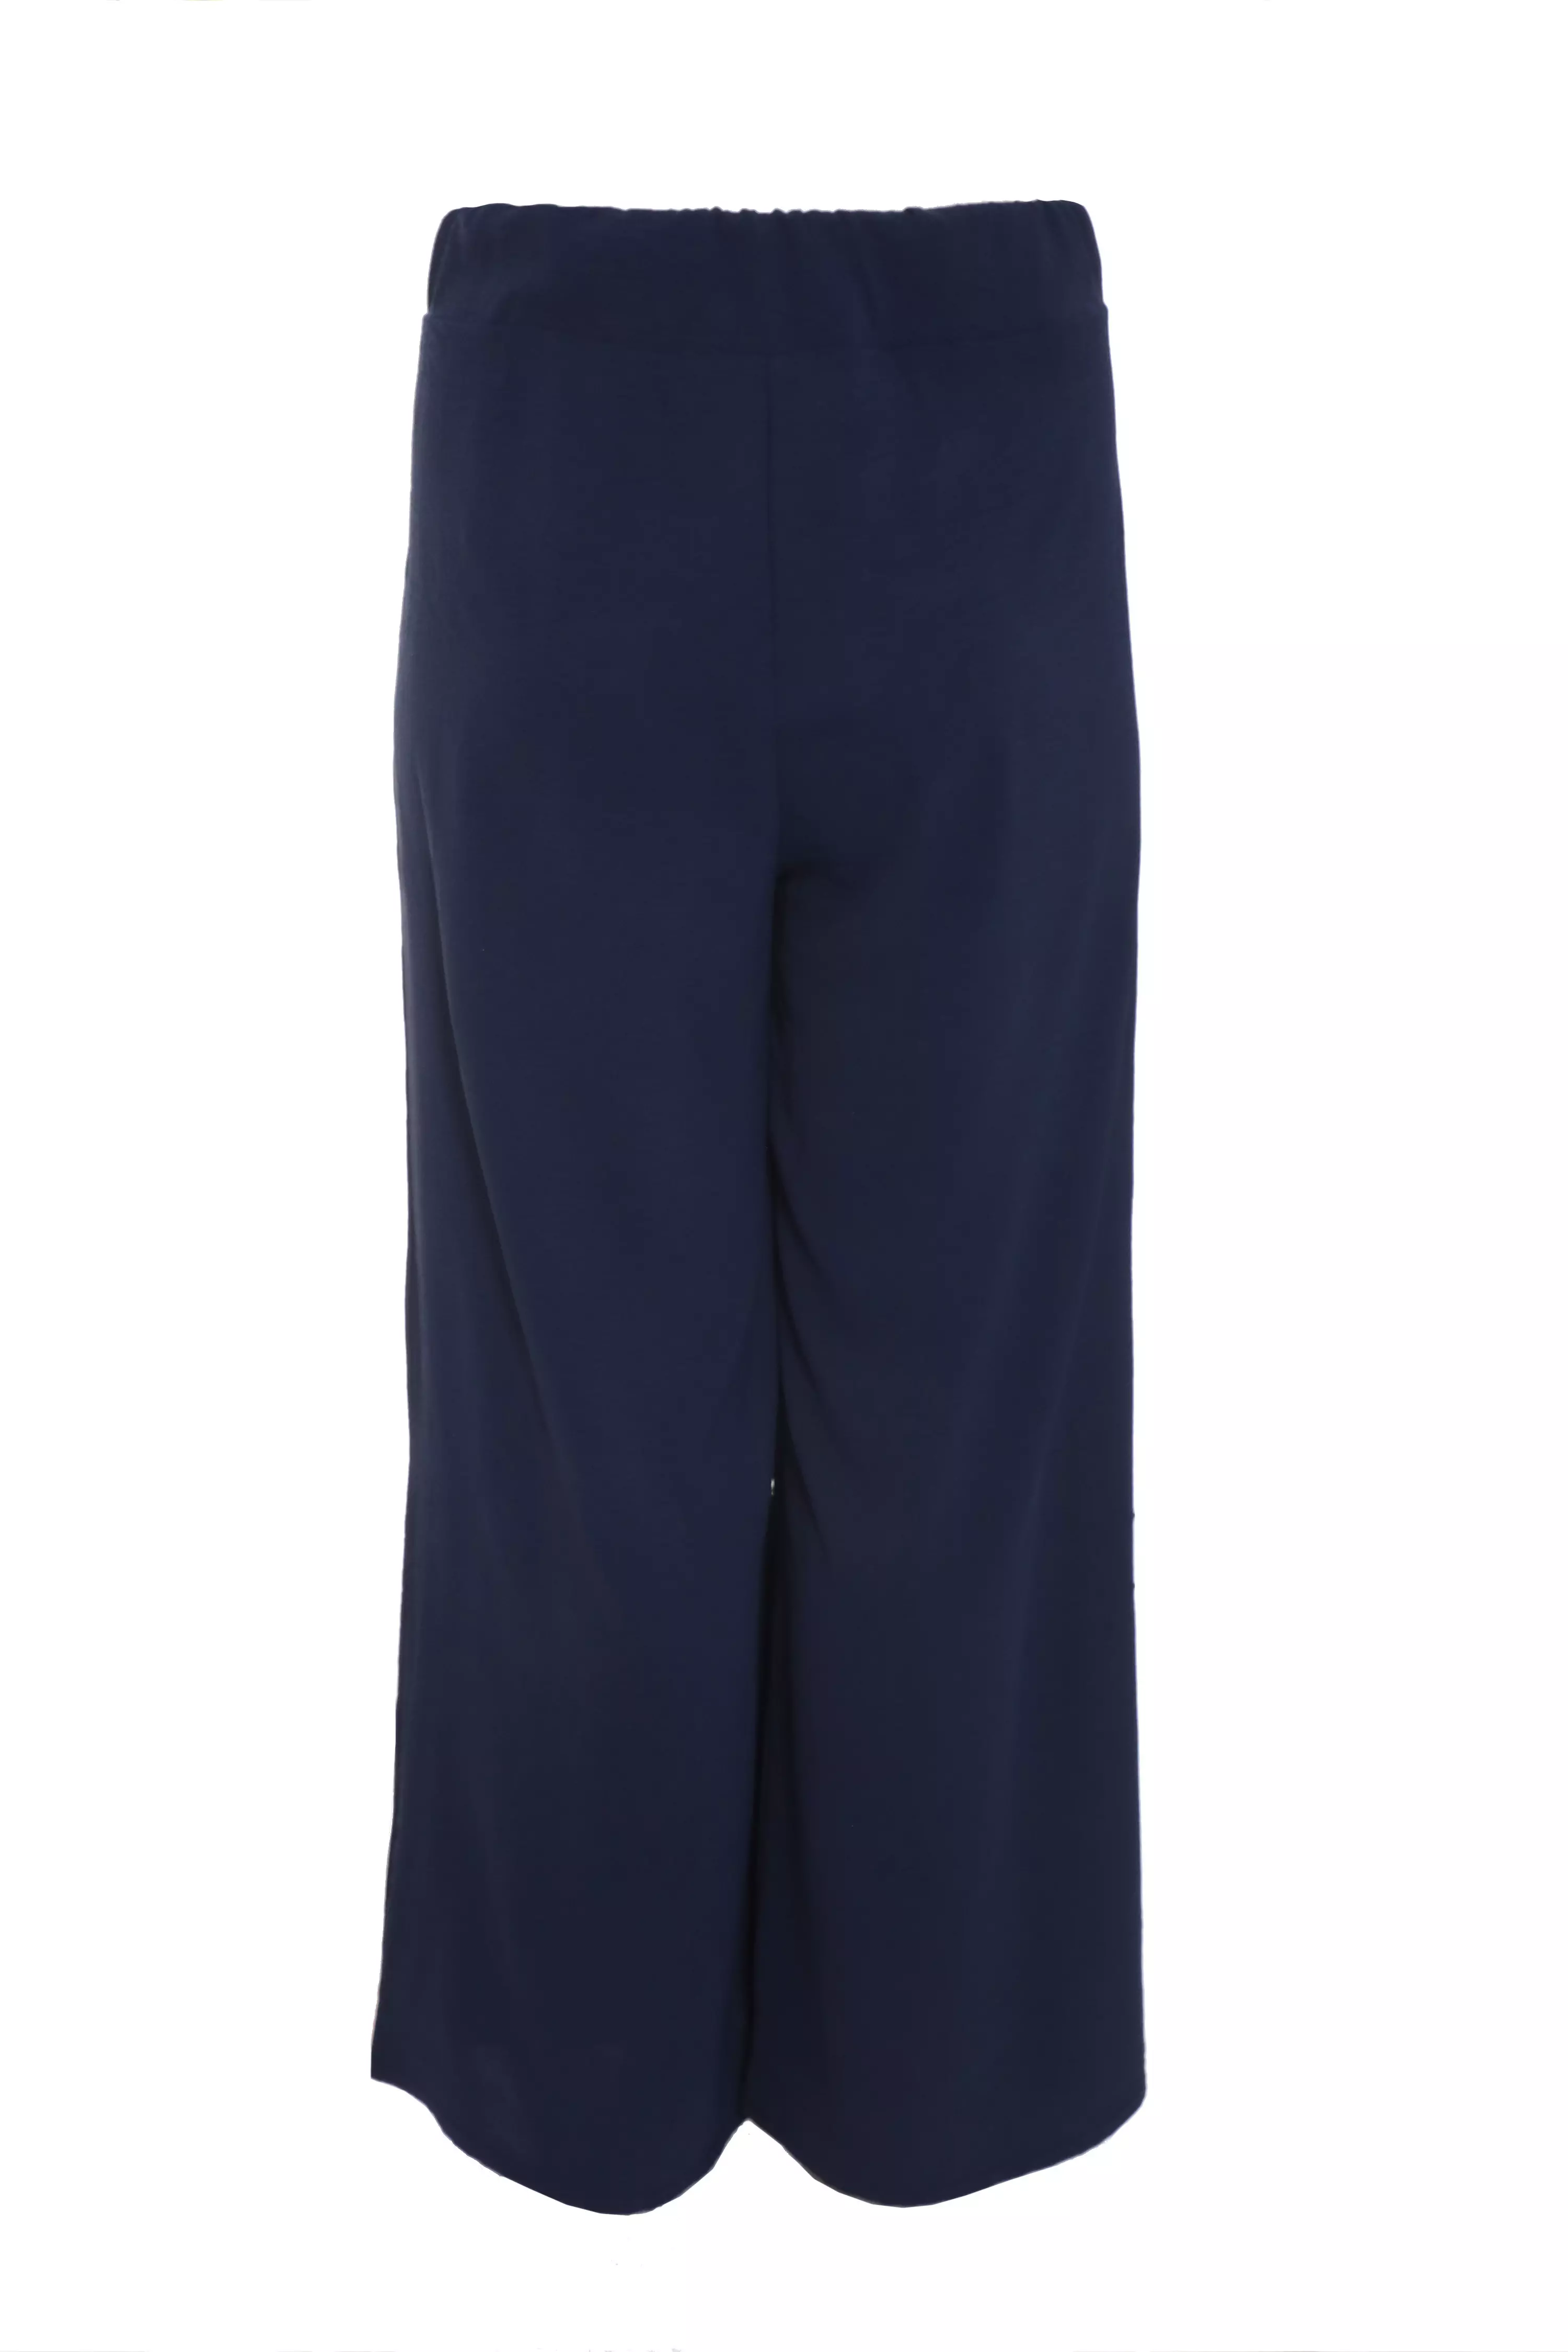 Curve Navy Wide Leg Trousers